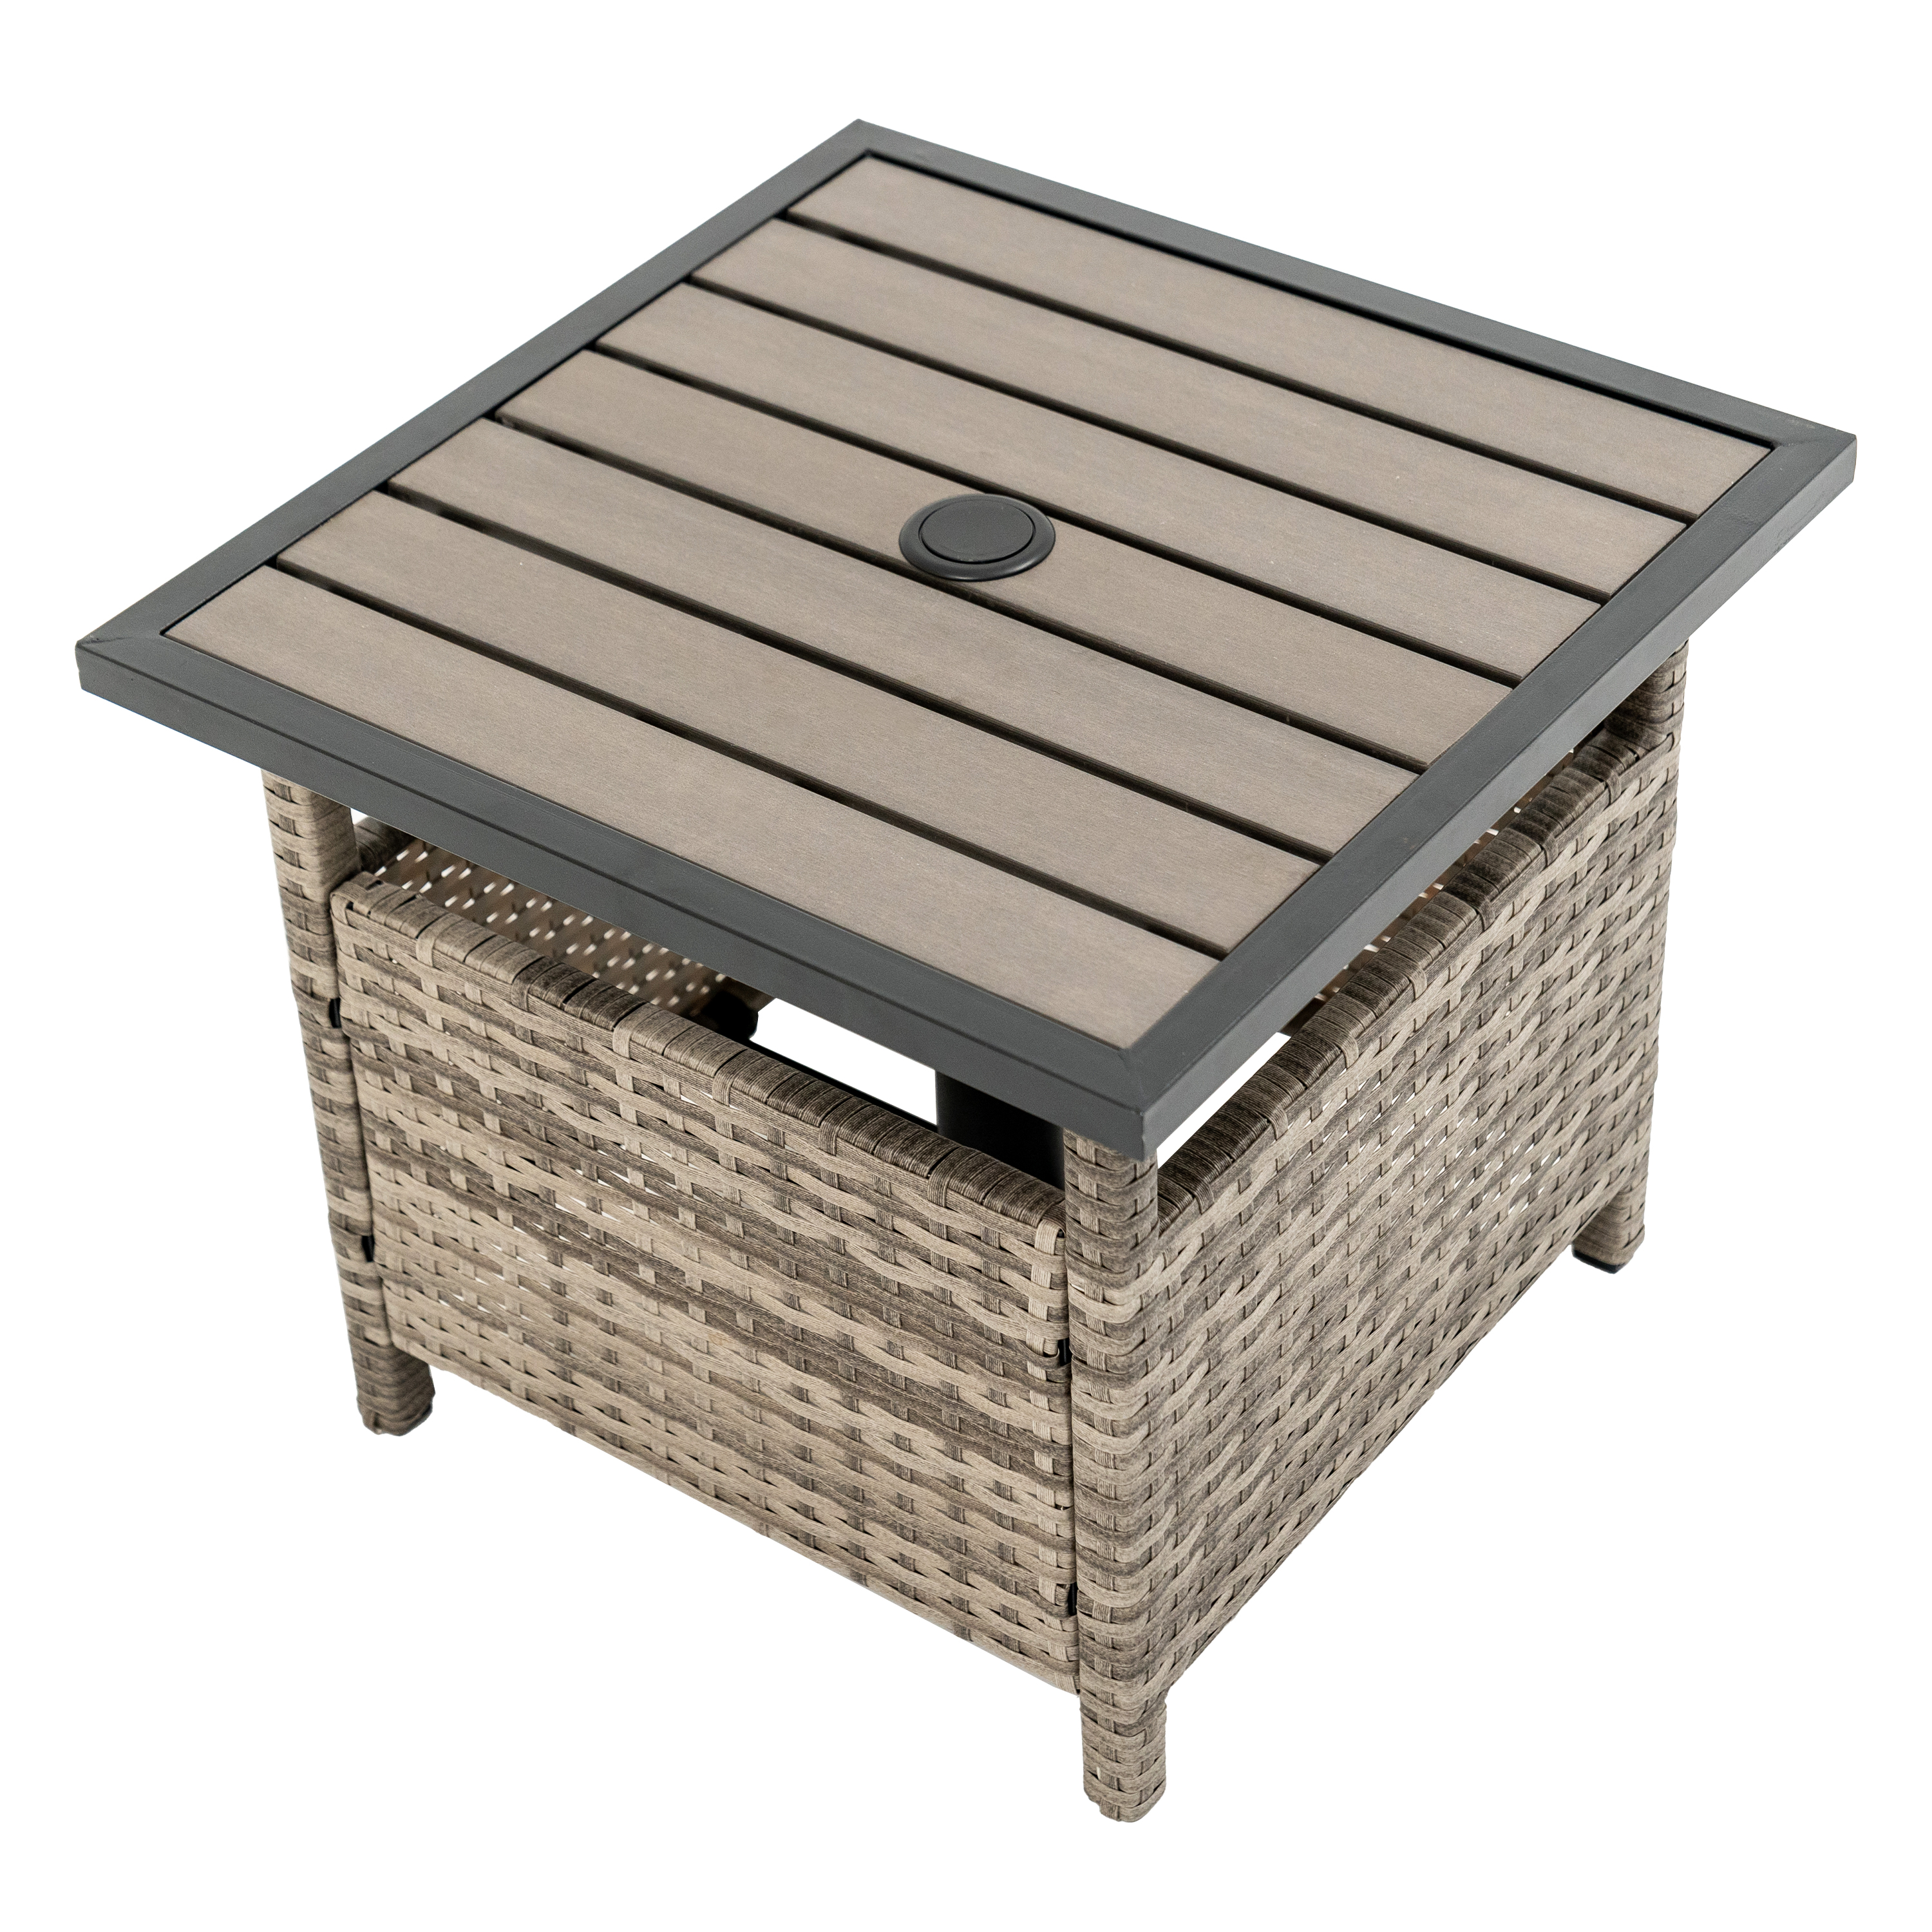 Outdoor Patio Side Table Umbrella Stand All-Weather PE Wicker Rattan Umbrella Table Furniture  for Garden Deck Pool Gray - image 1 of 8